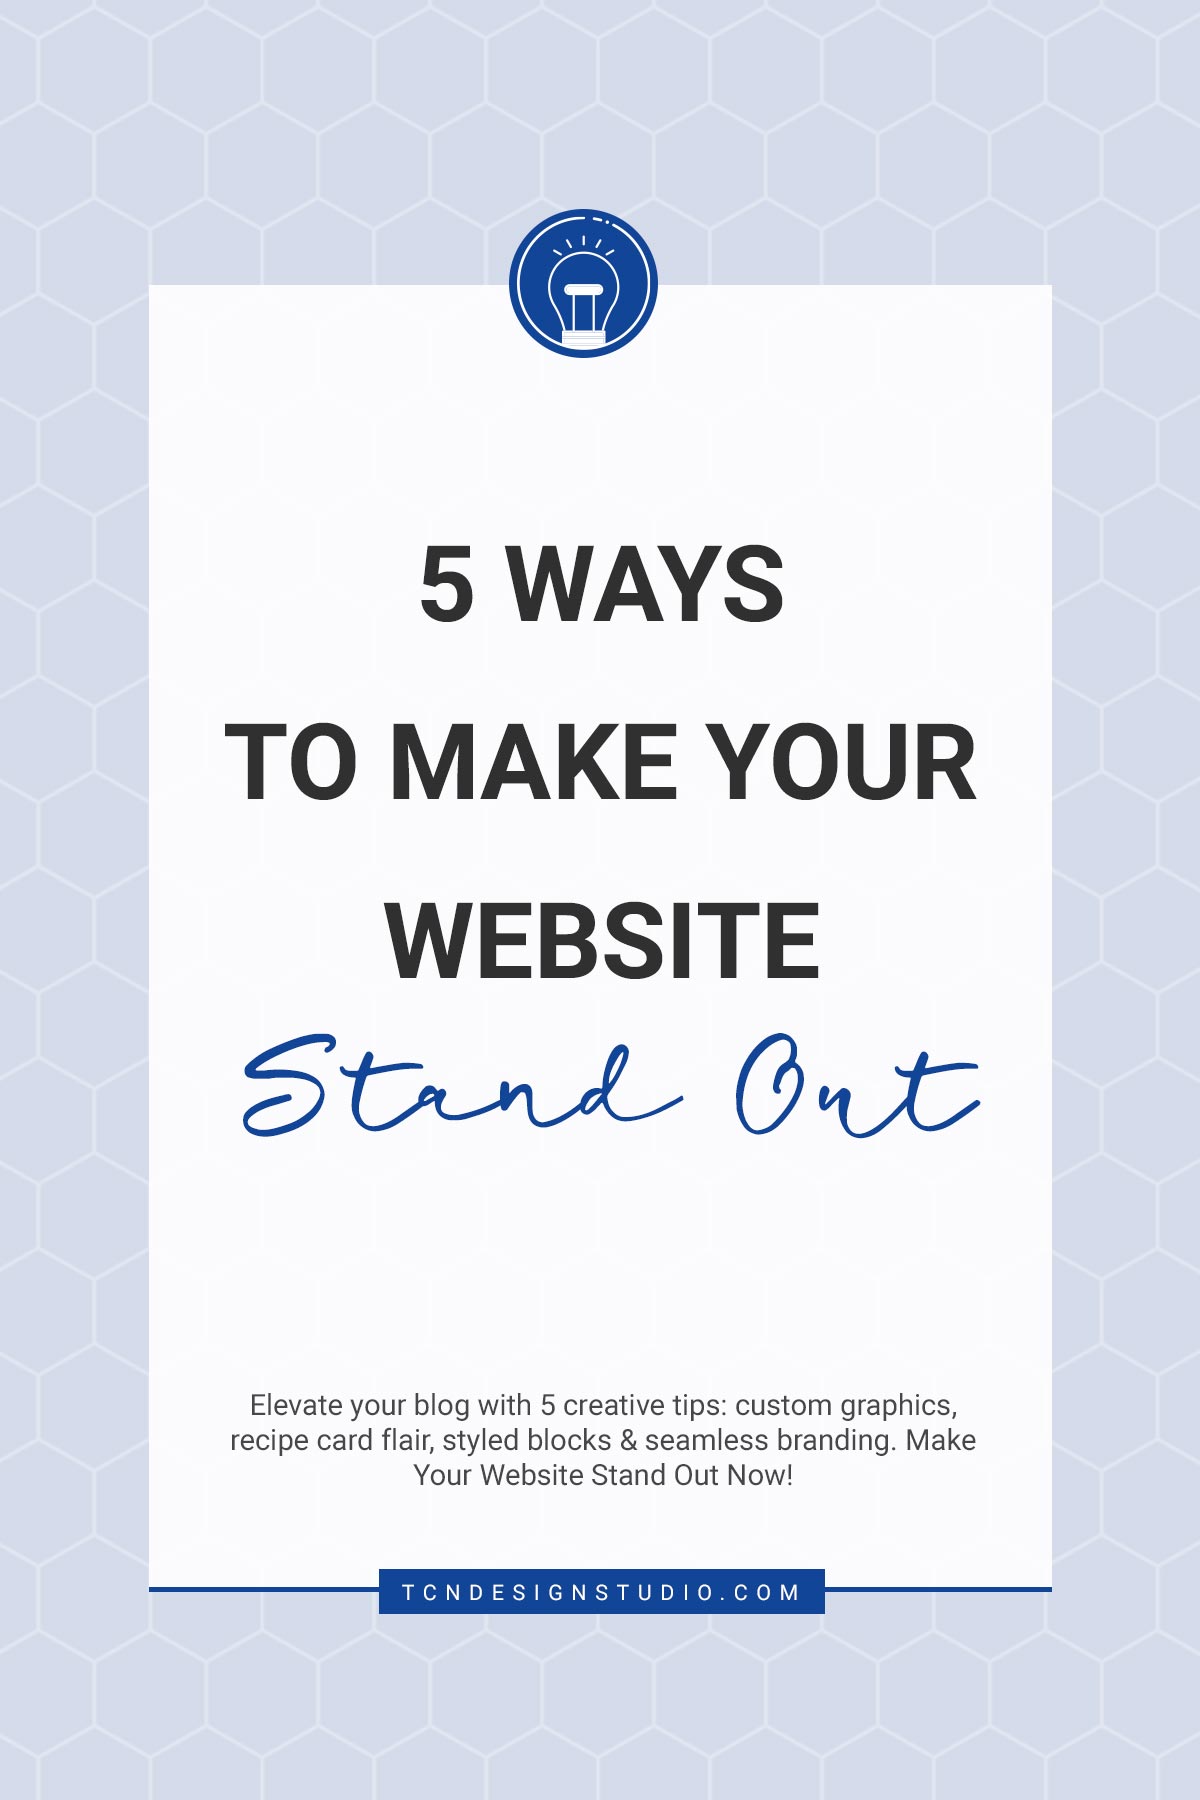 5 Ways to Make Your Website Stand Out